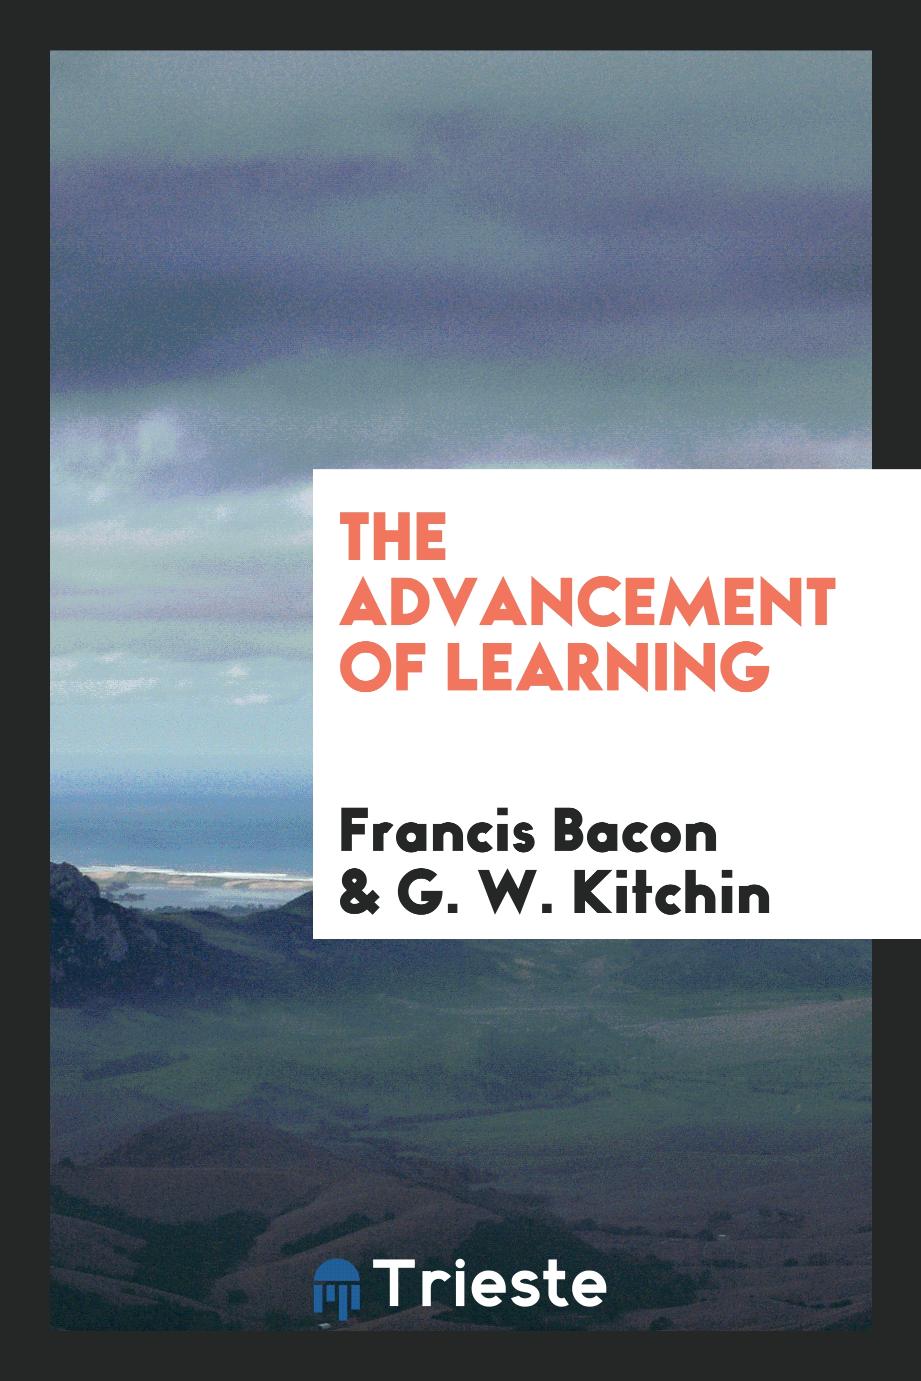 The advancement of learning